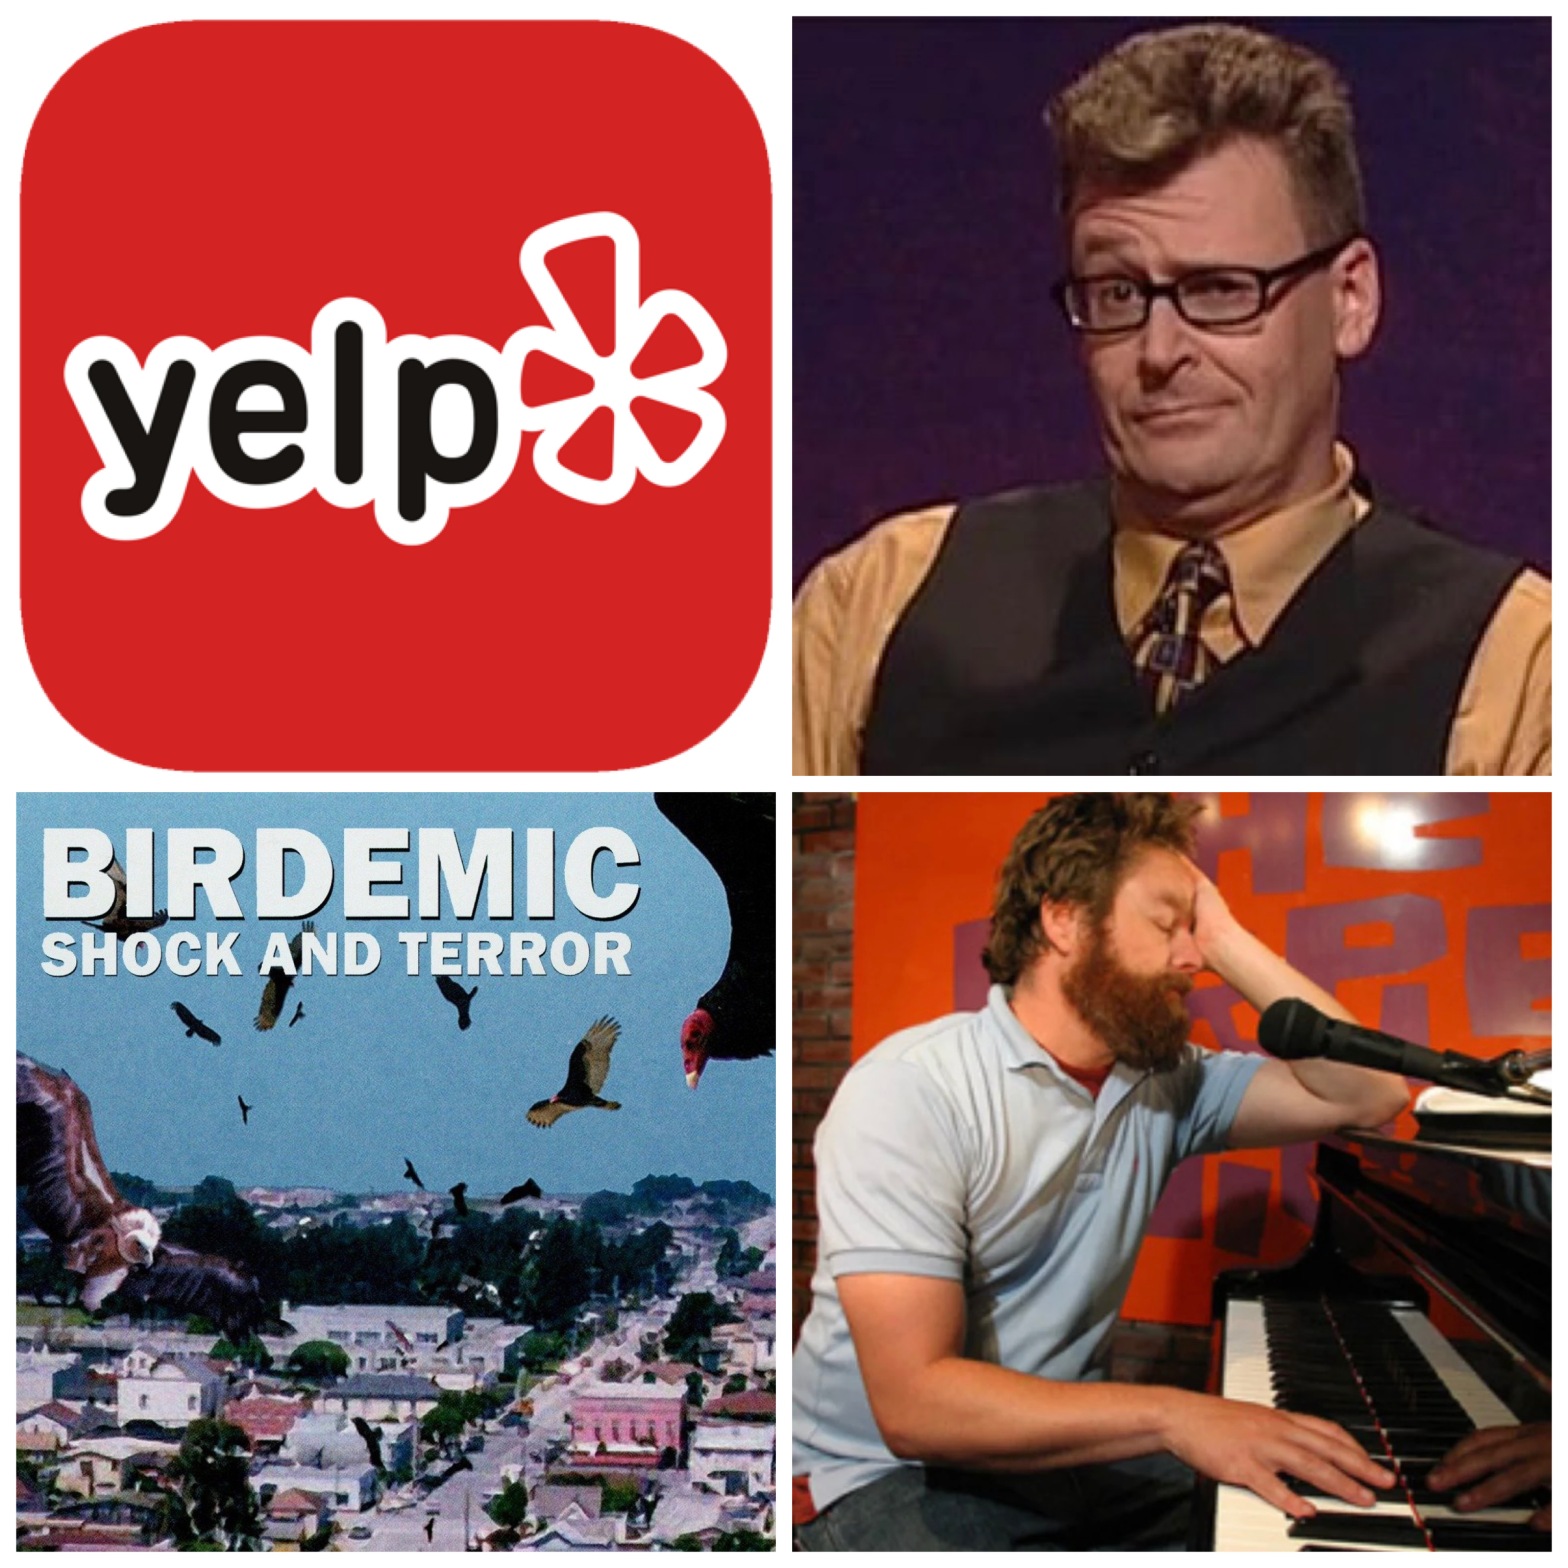 Yelp, Greg Proops on Whose Line is it Anyway, Birdemic, and Zach Galifianakis playing the piano.